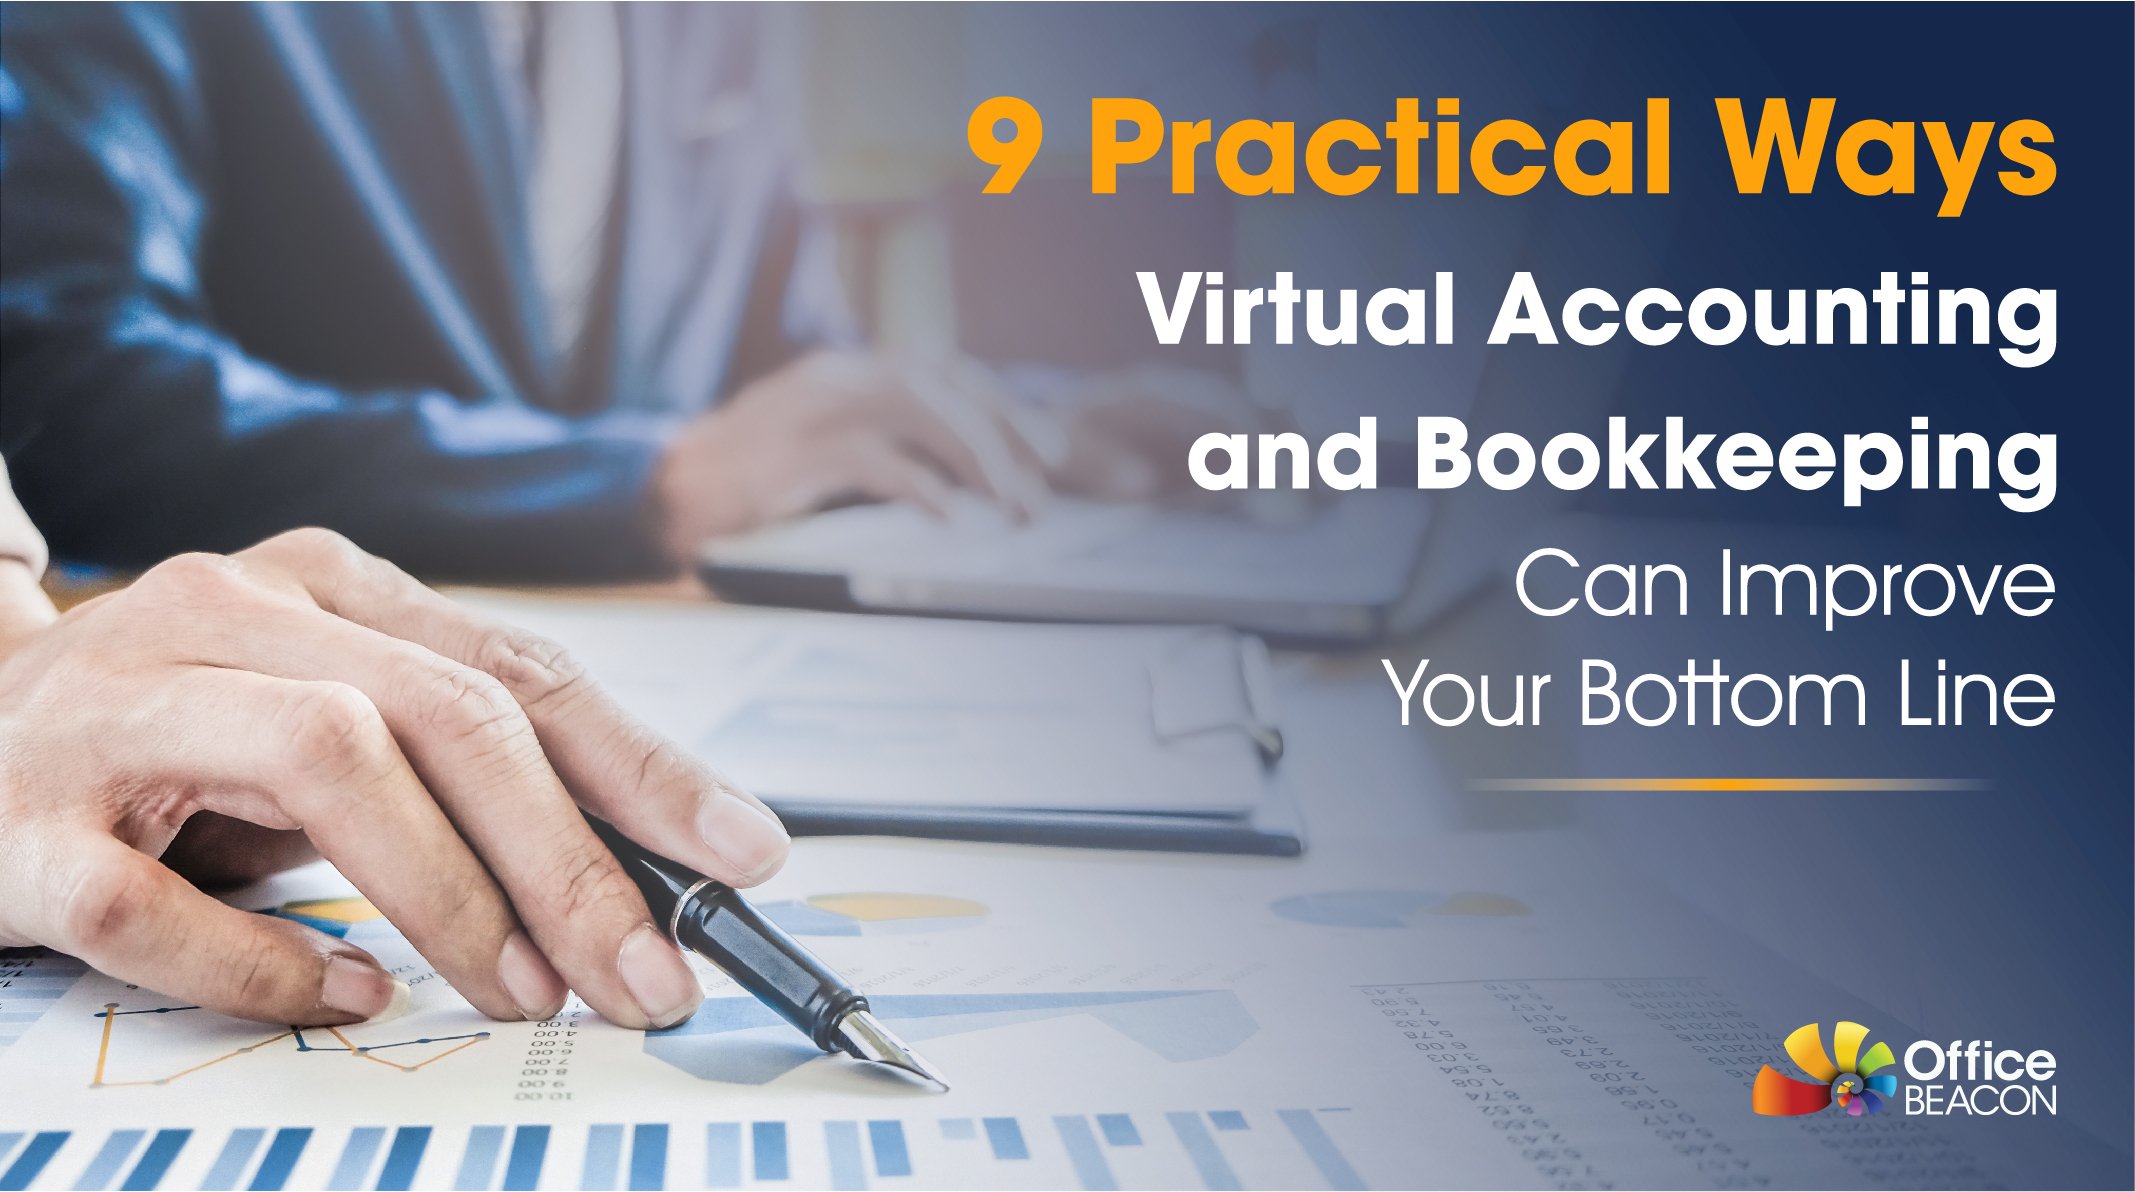 9 Practical Ways Virtual Accounting and Bookkeeping Can Improve Your Bottom Line